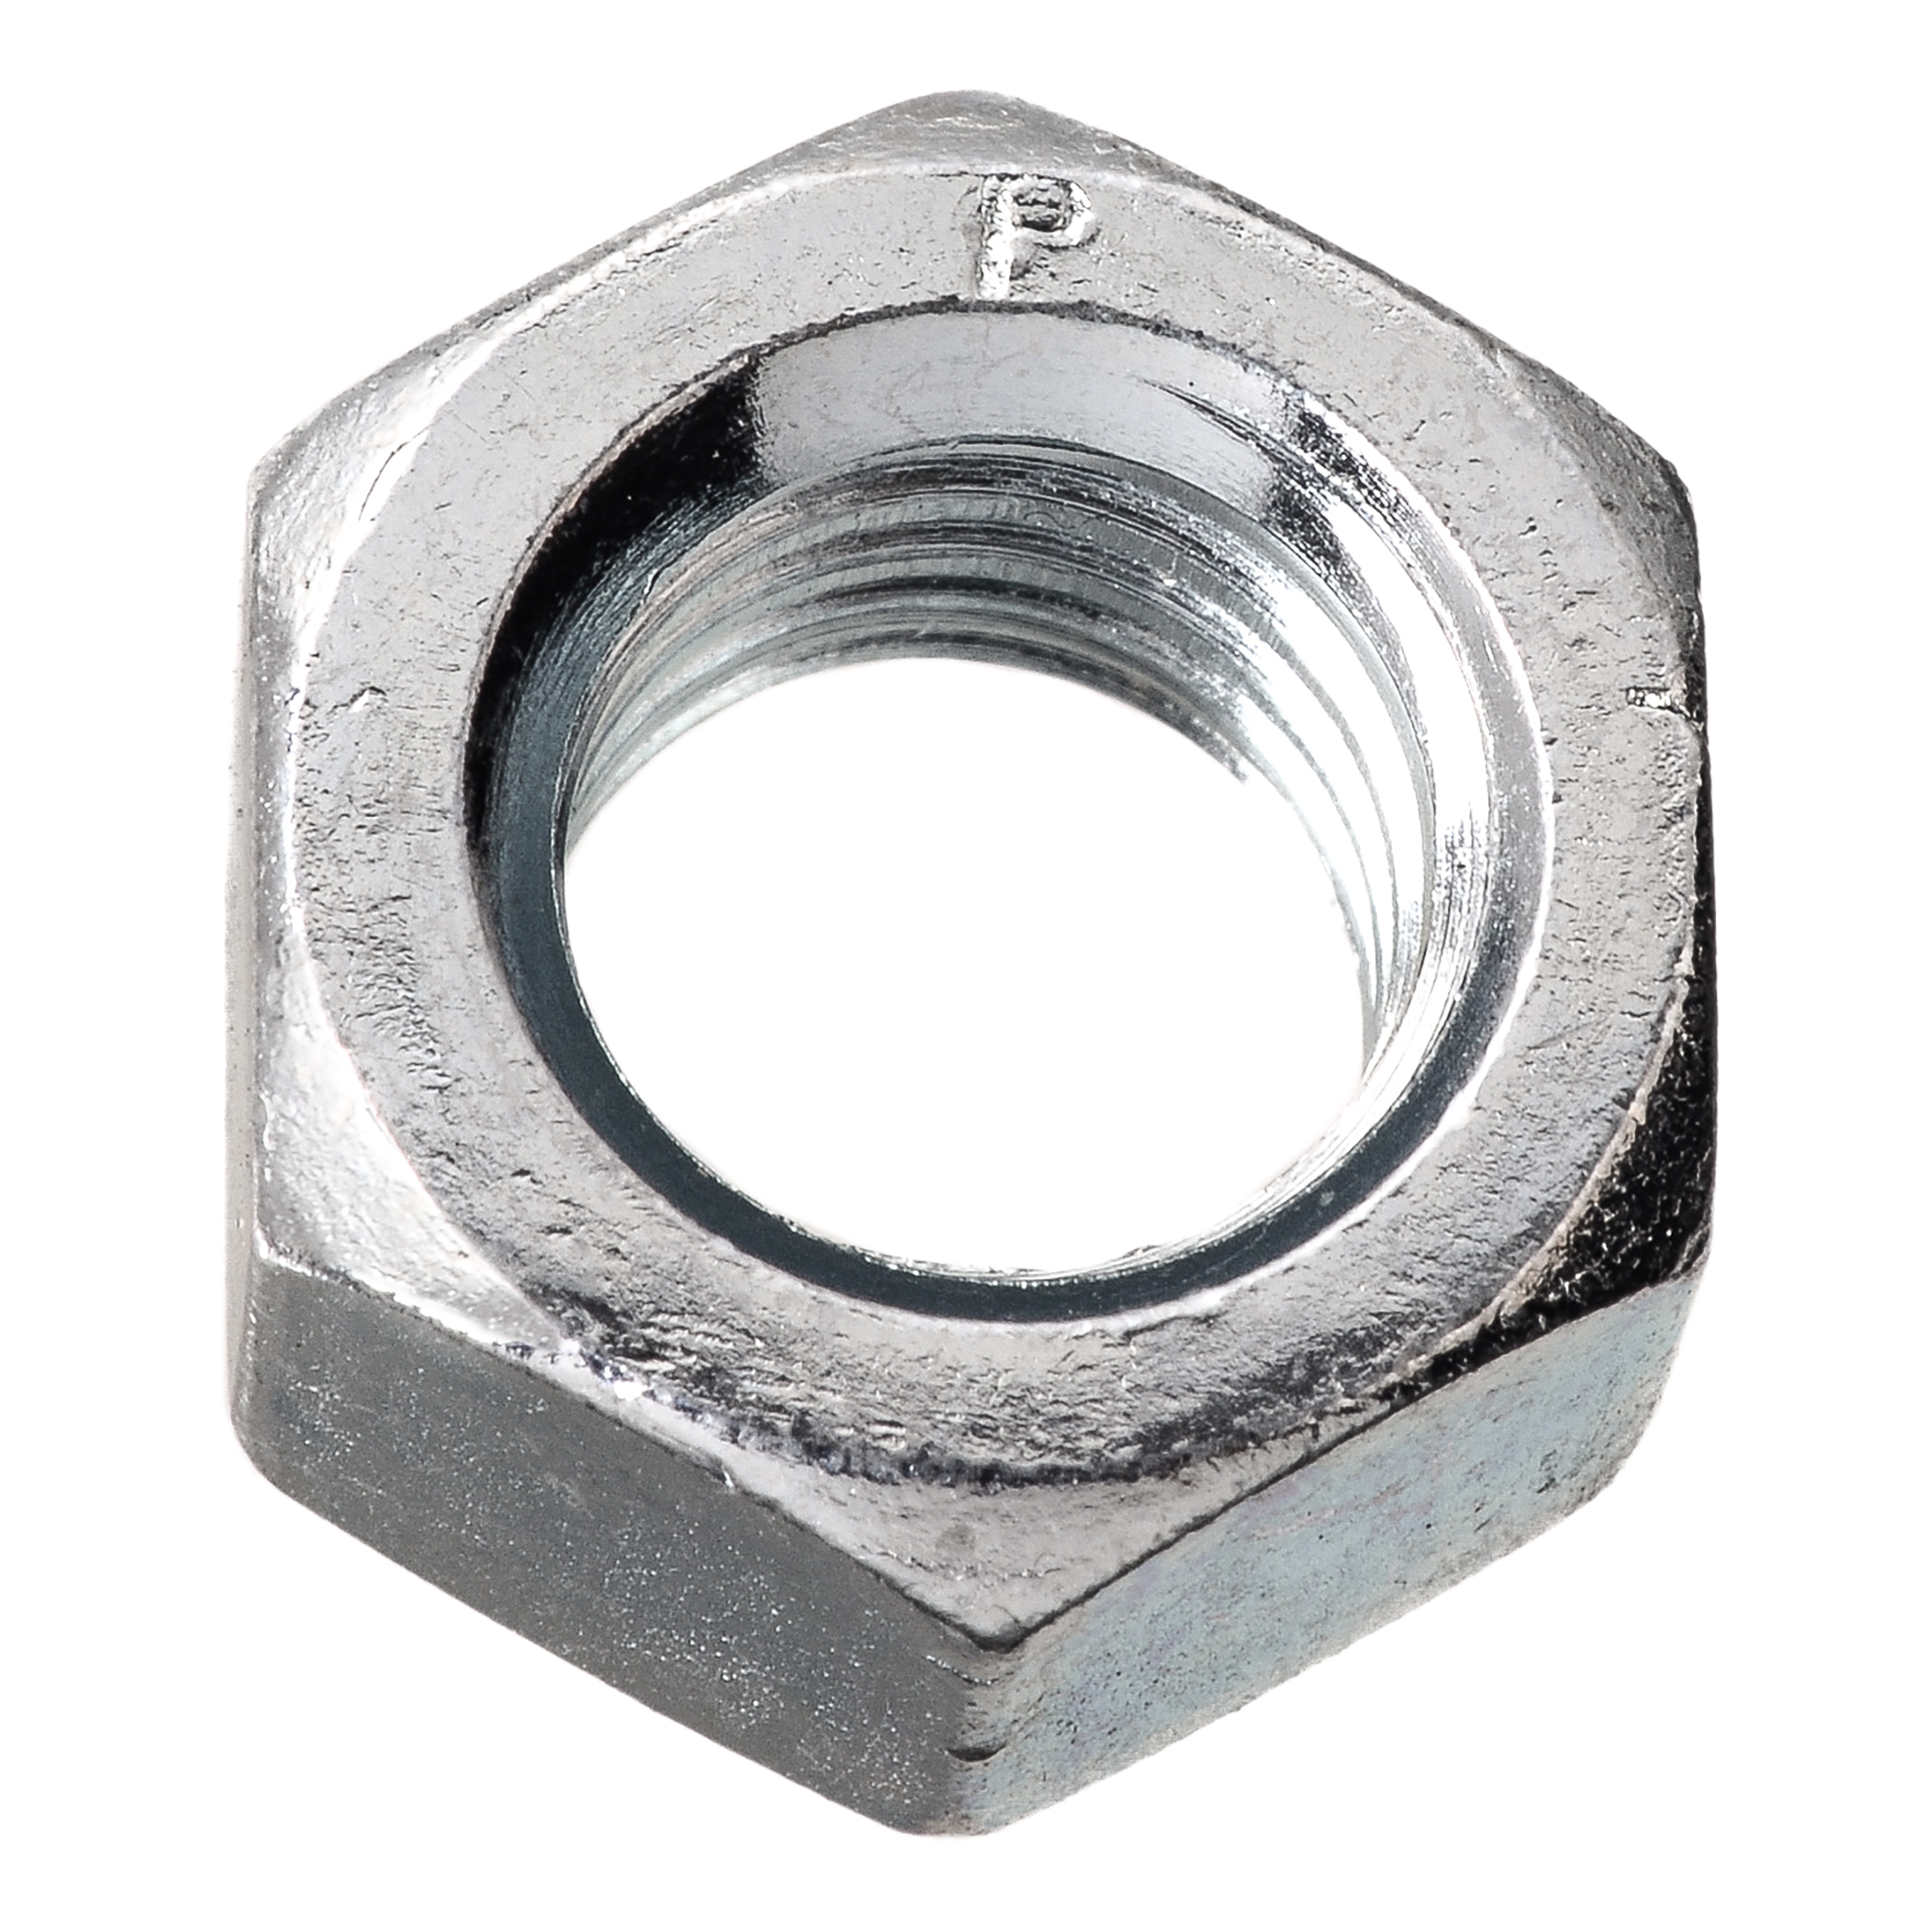 3/8-24 Stainless Steel Acorn Dome Cap Hex Nut  3/8 x 24 Nuts 3/8x24 5 